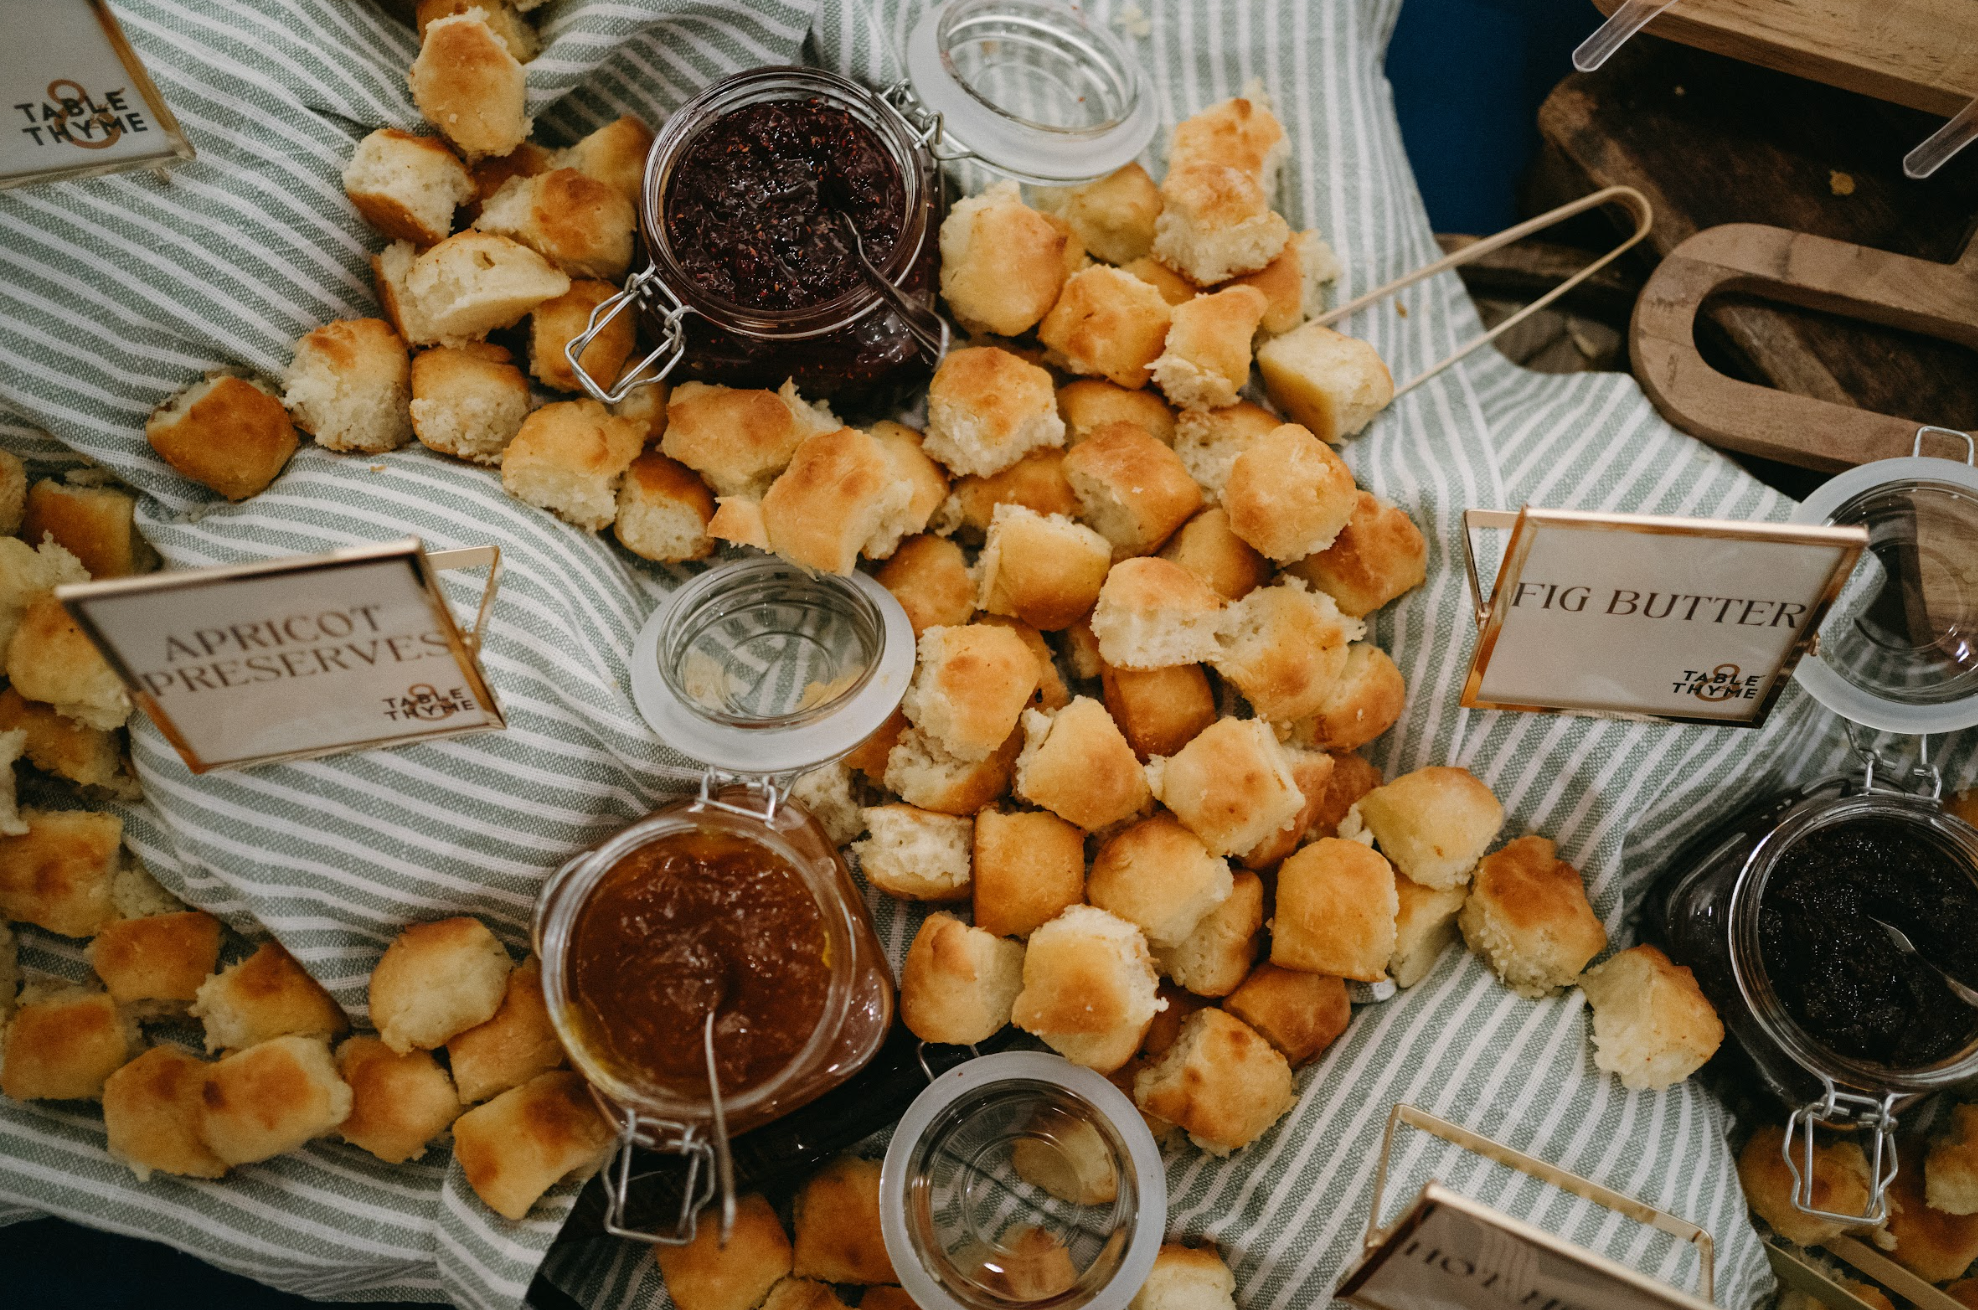 Image of biscuit board: scattered biscuits on table with assorted spreads